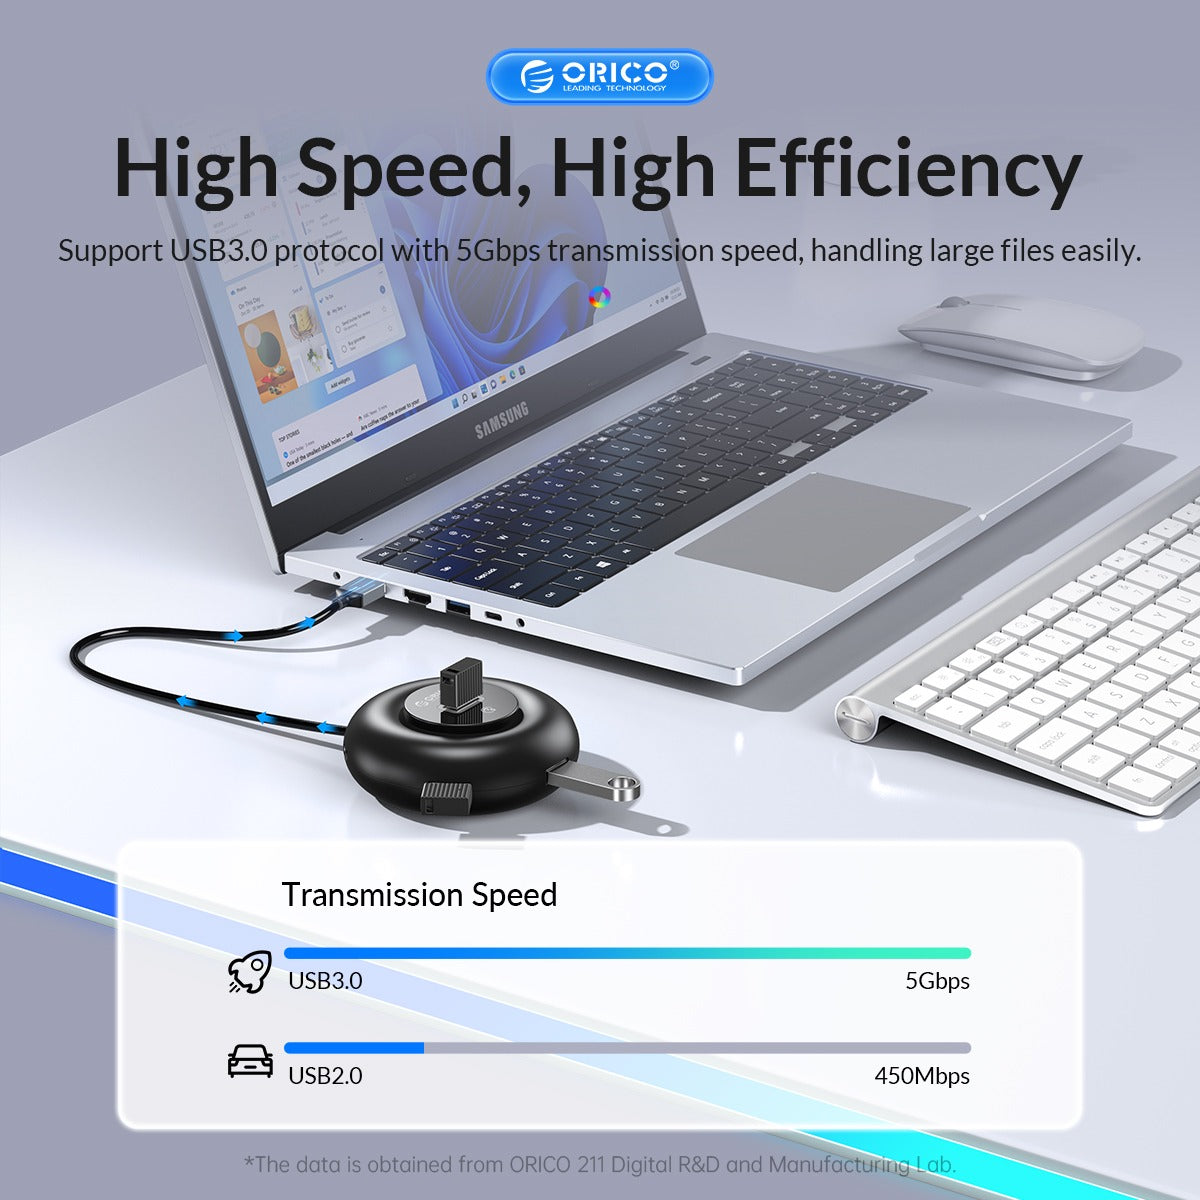 ORICO YX1-C2 (0.3m) 4-Port USB 3.0 Type C Desktop Hub 10W with 5Gbps Transmission Rate, 5Gbps USB-A 3.0, 480Mbps USB-A 2.0 Output for Windows 8/10, macOS, Linux, PC, Laptop, Desktop Computer